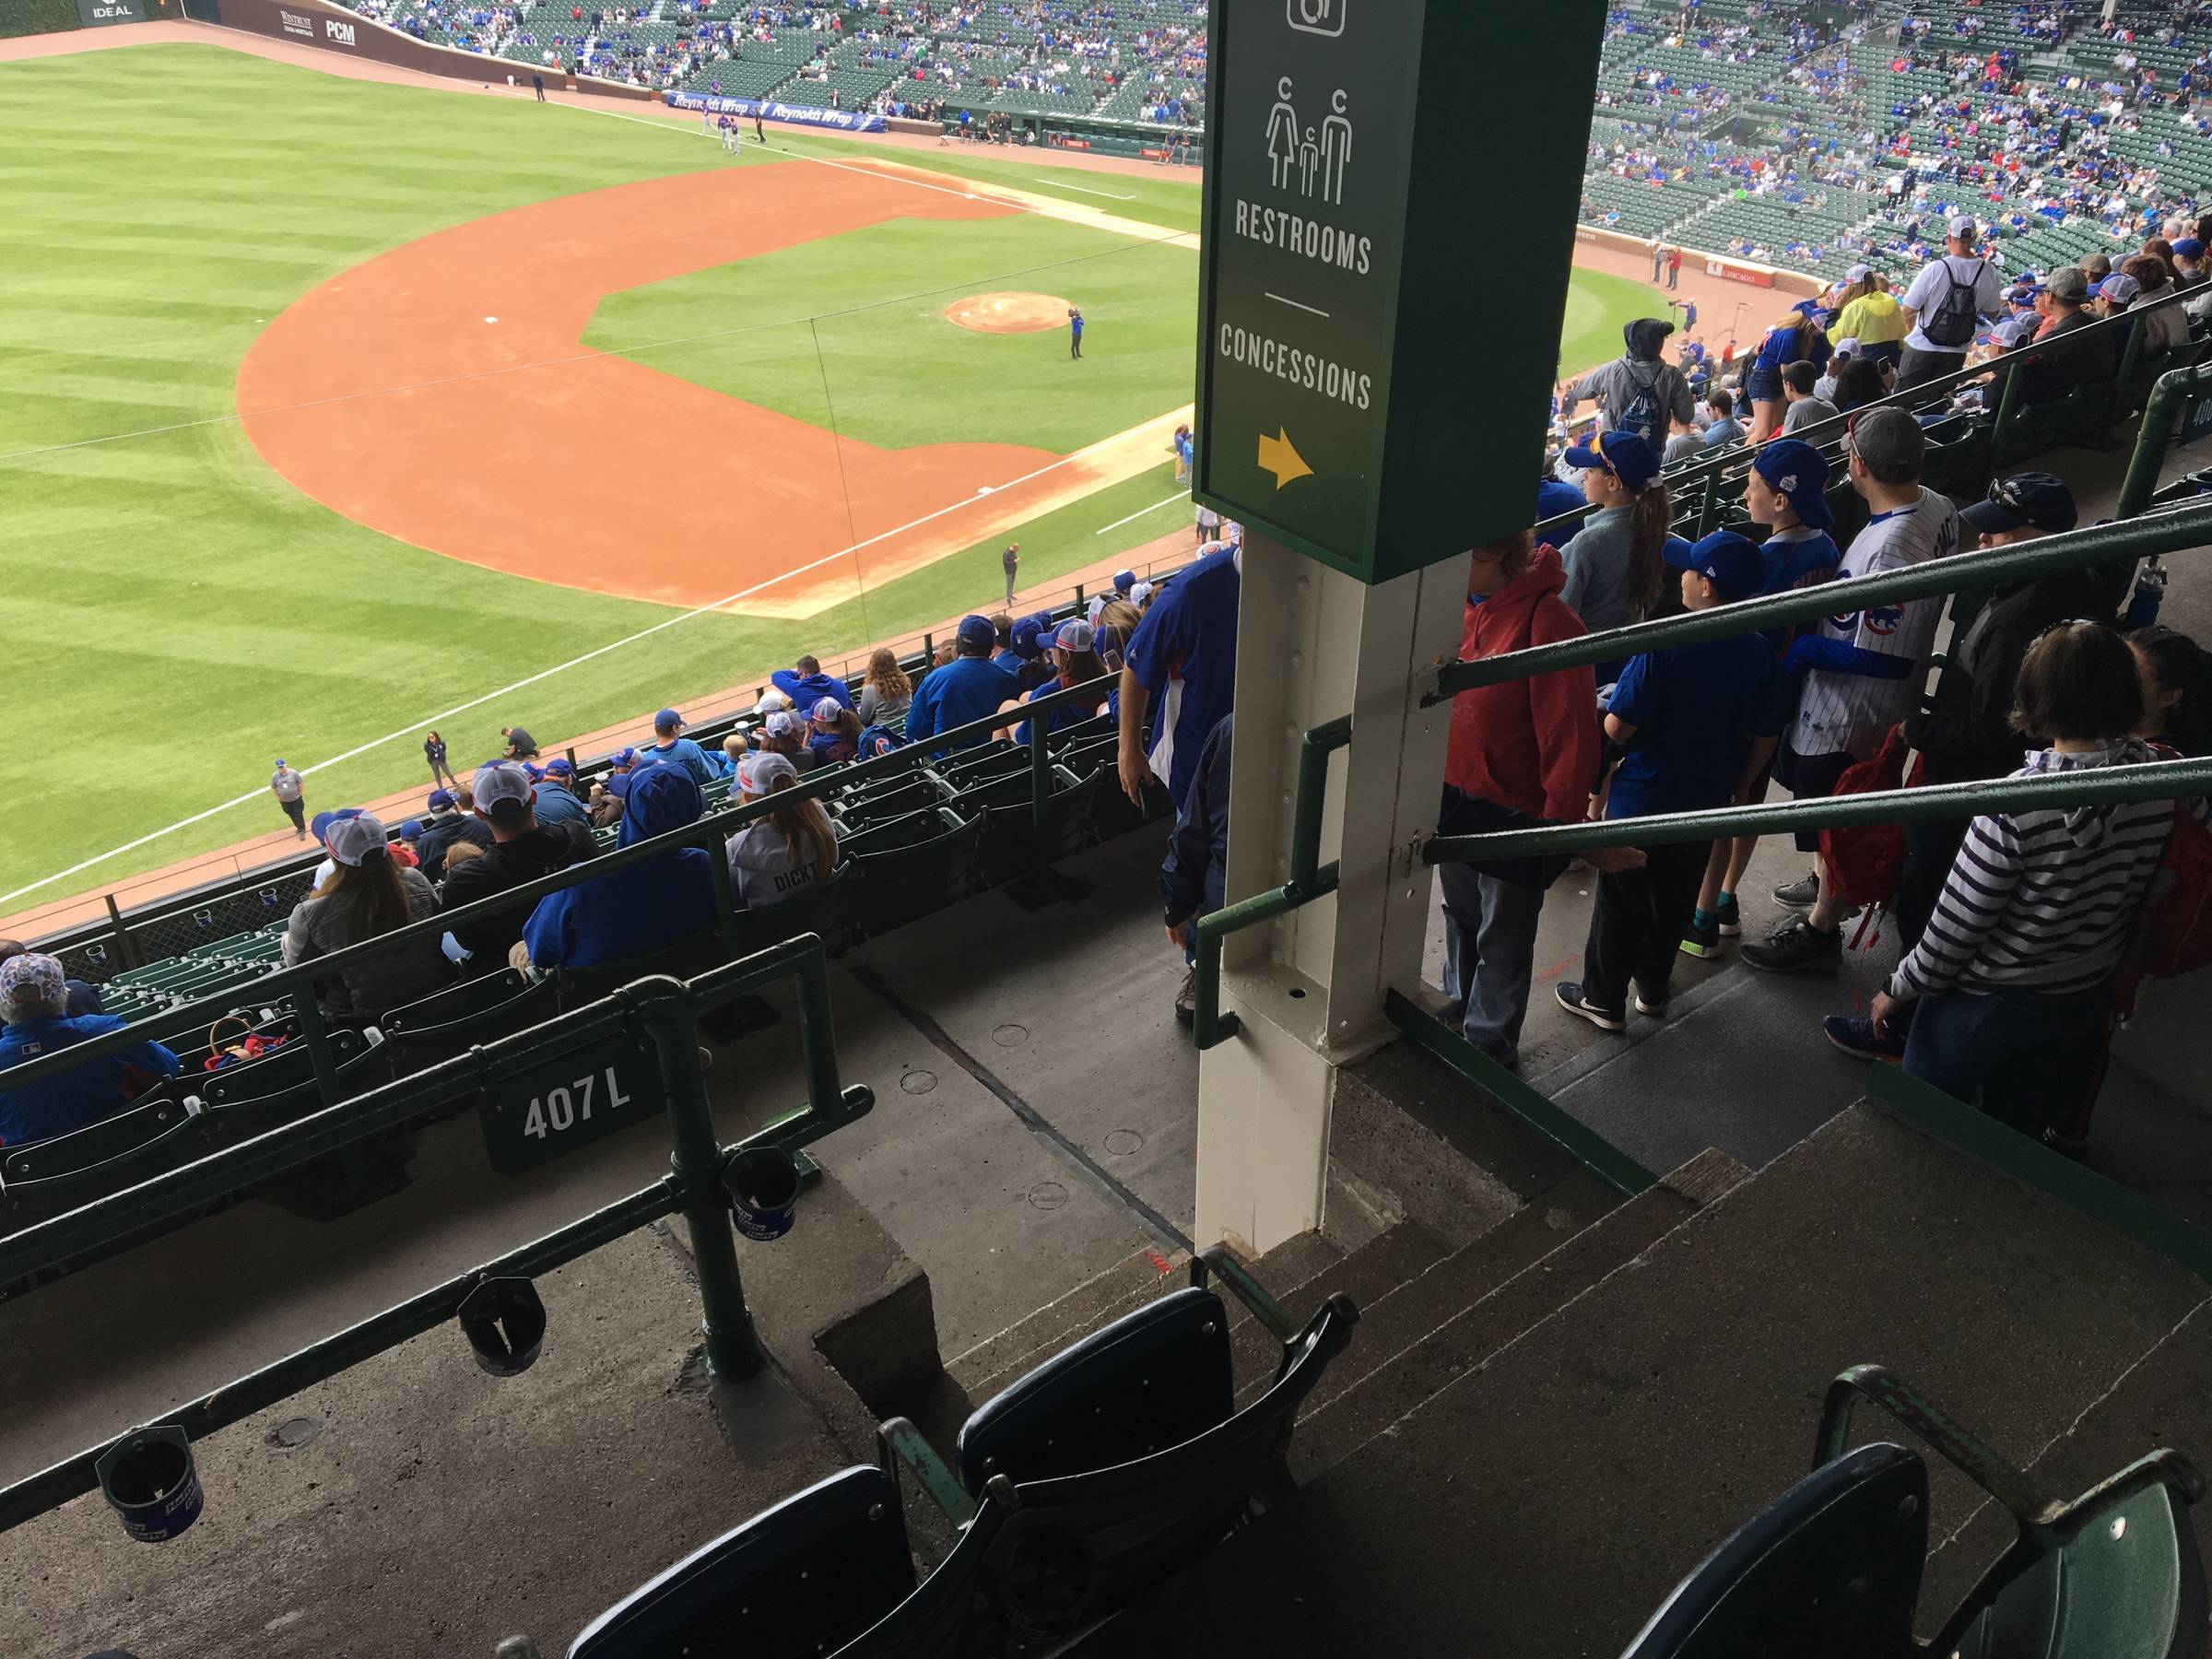 Pole in Section 408L at Wrigley Field